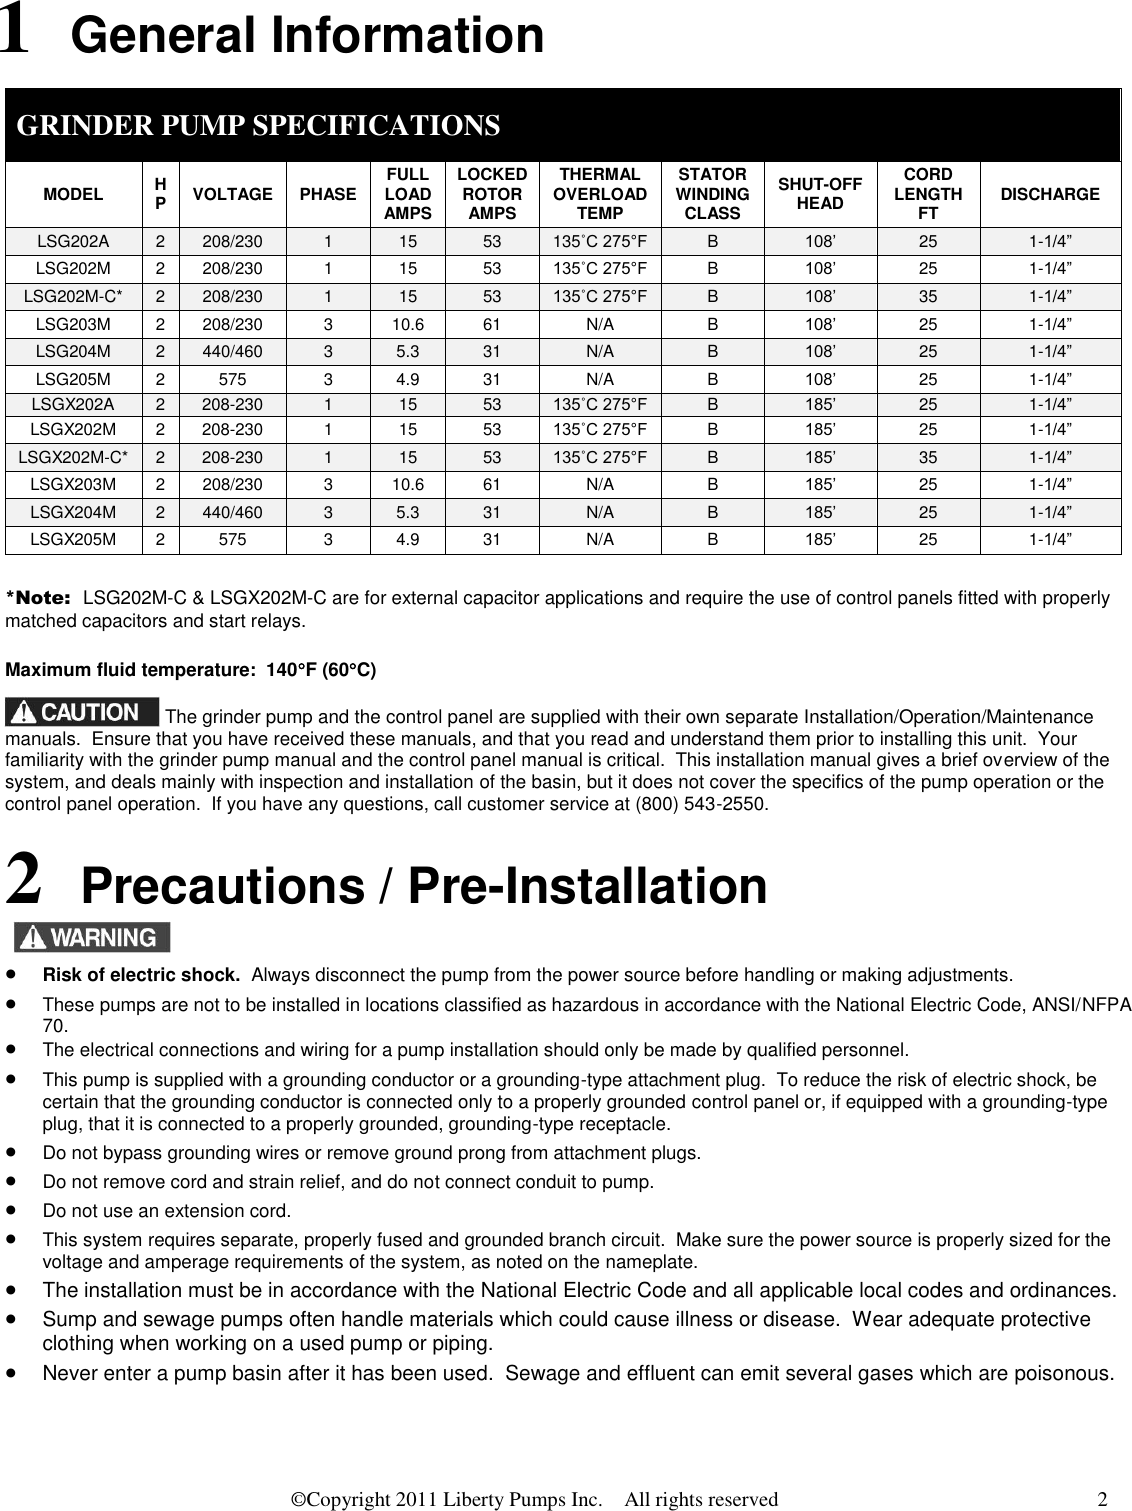 Page 2 of 6 - Installation Manual  847 2 Liberty D3672LSG204-24 Instructions